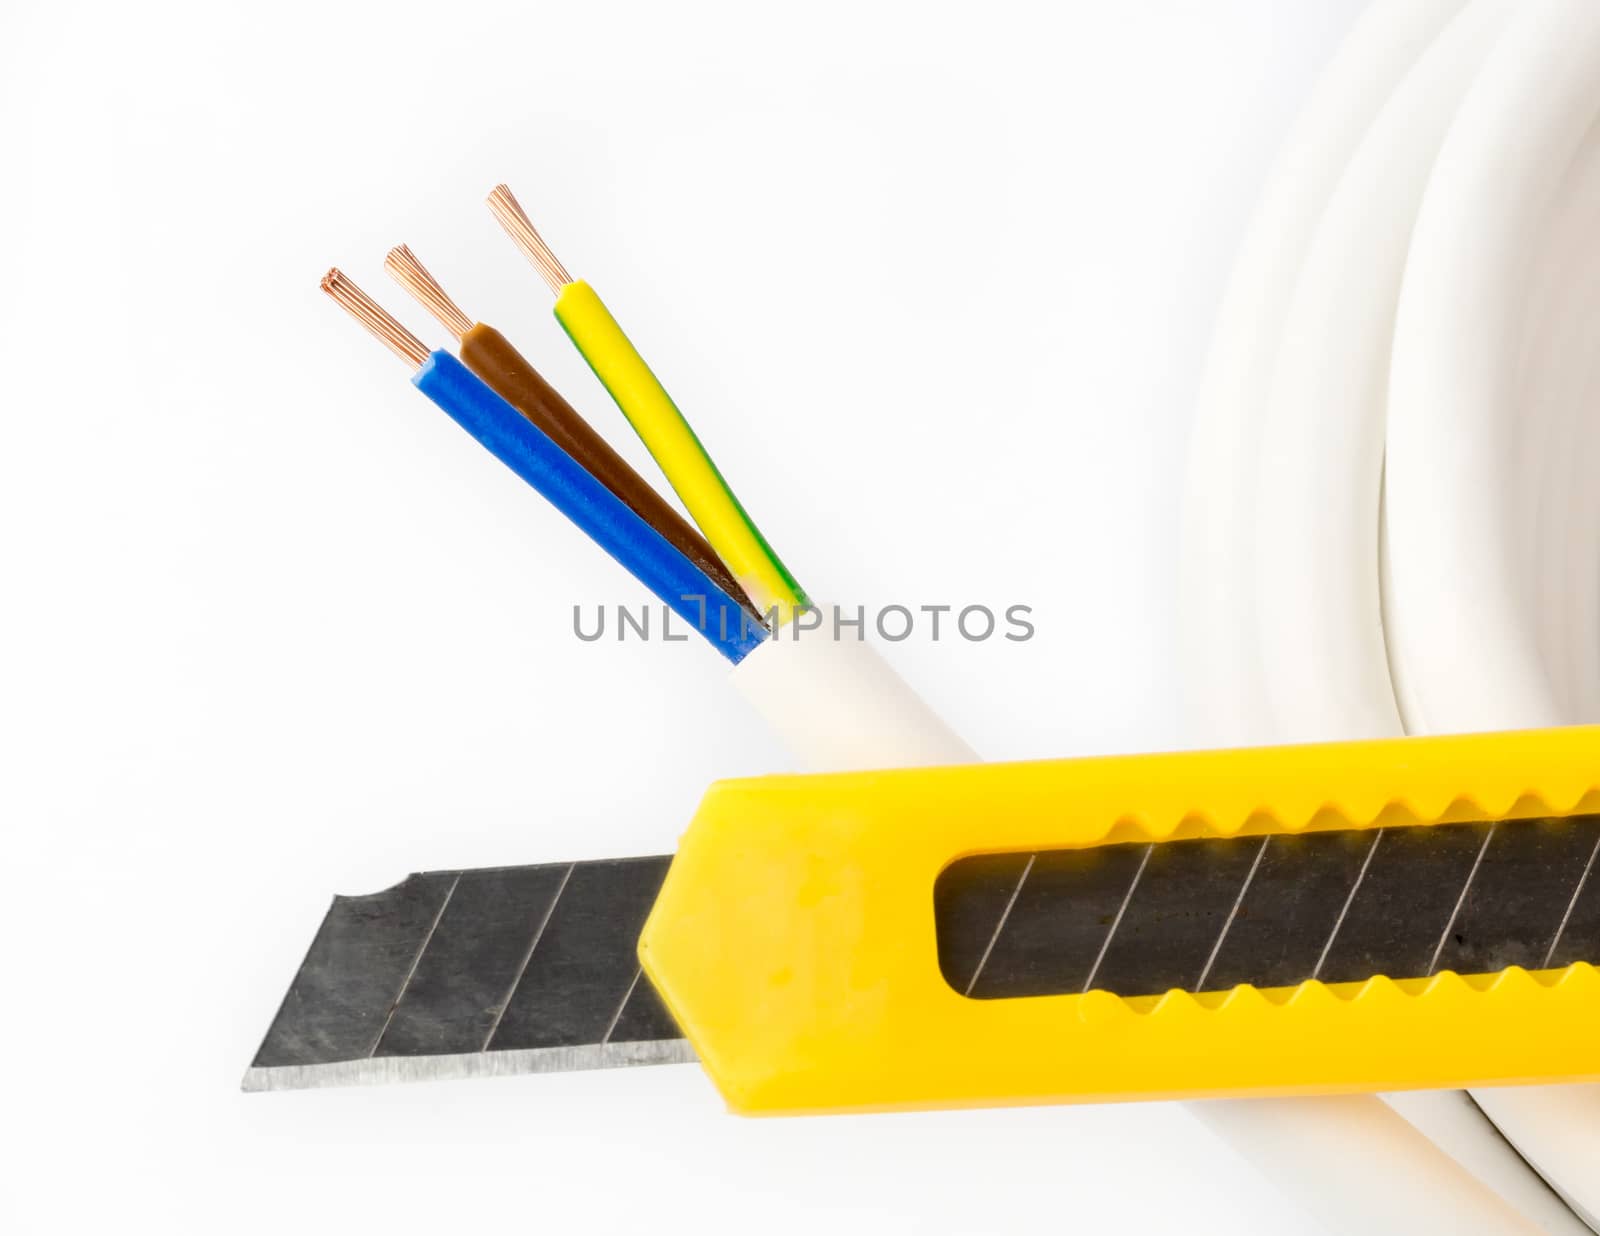 Stripped cords of a three-wire power cord